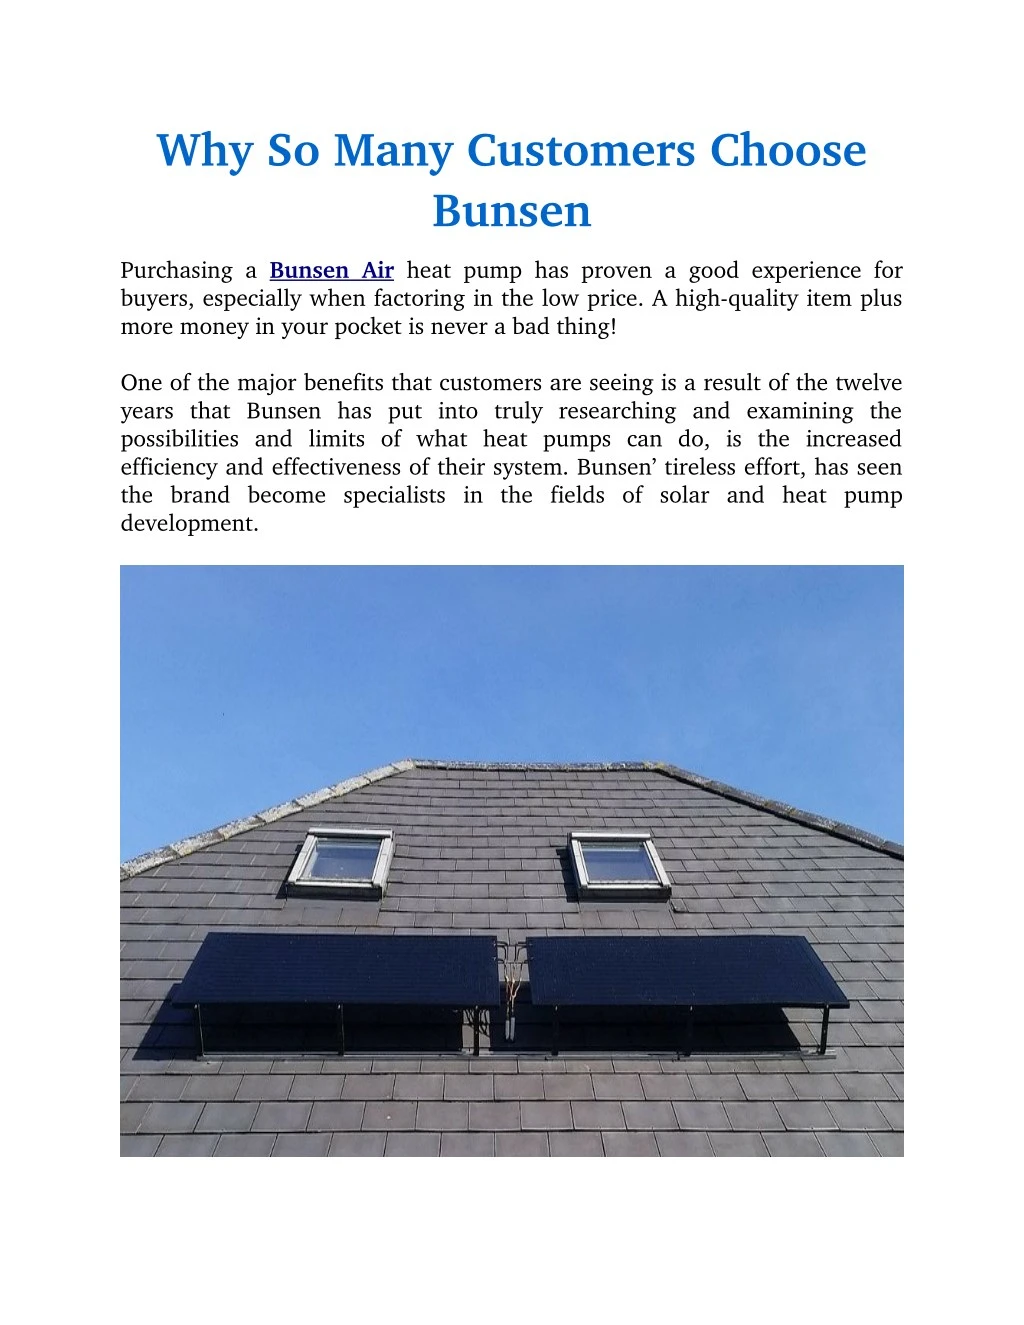 why so many customers choose bunsen